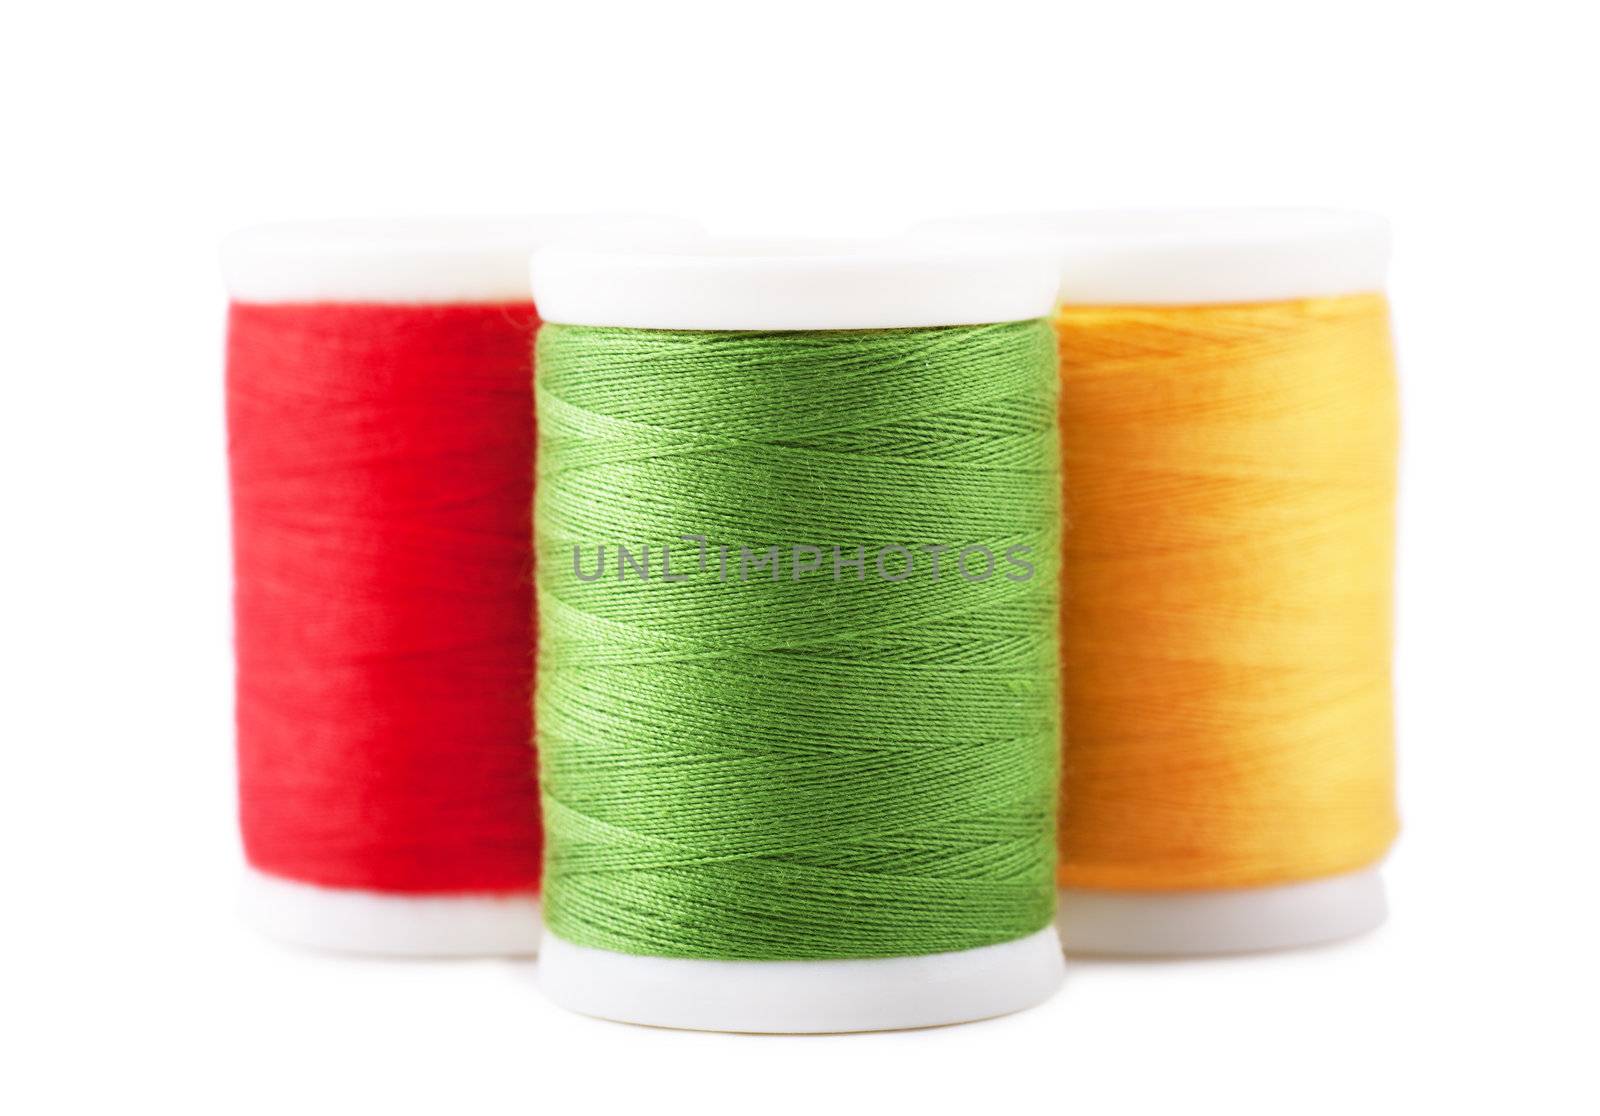 Three spools with green, red and yellow thread